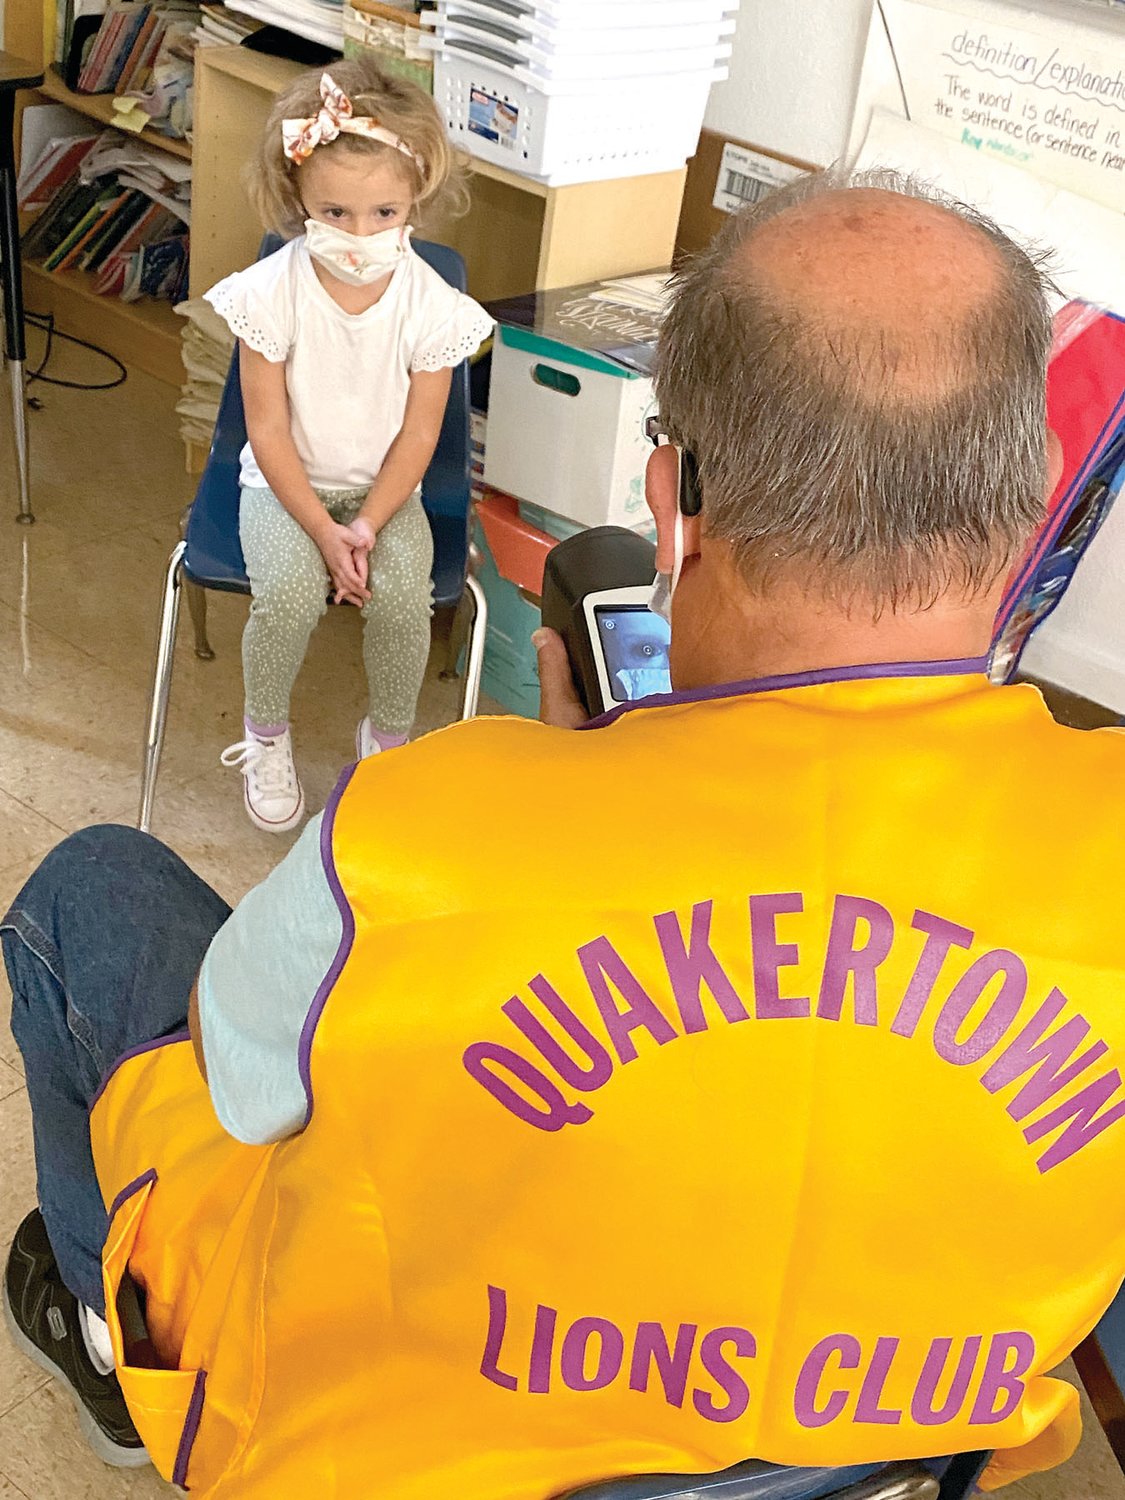 Marty Mack and Diane Williams of the Quakertown Lions Club provide an ear exam on Mia, St. Isidore School preschooler.